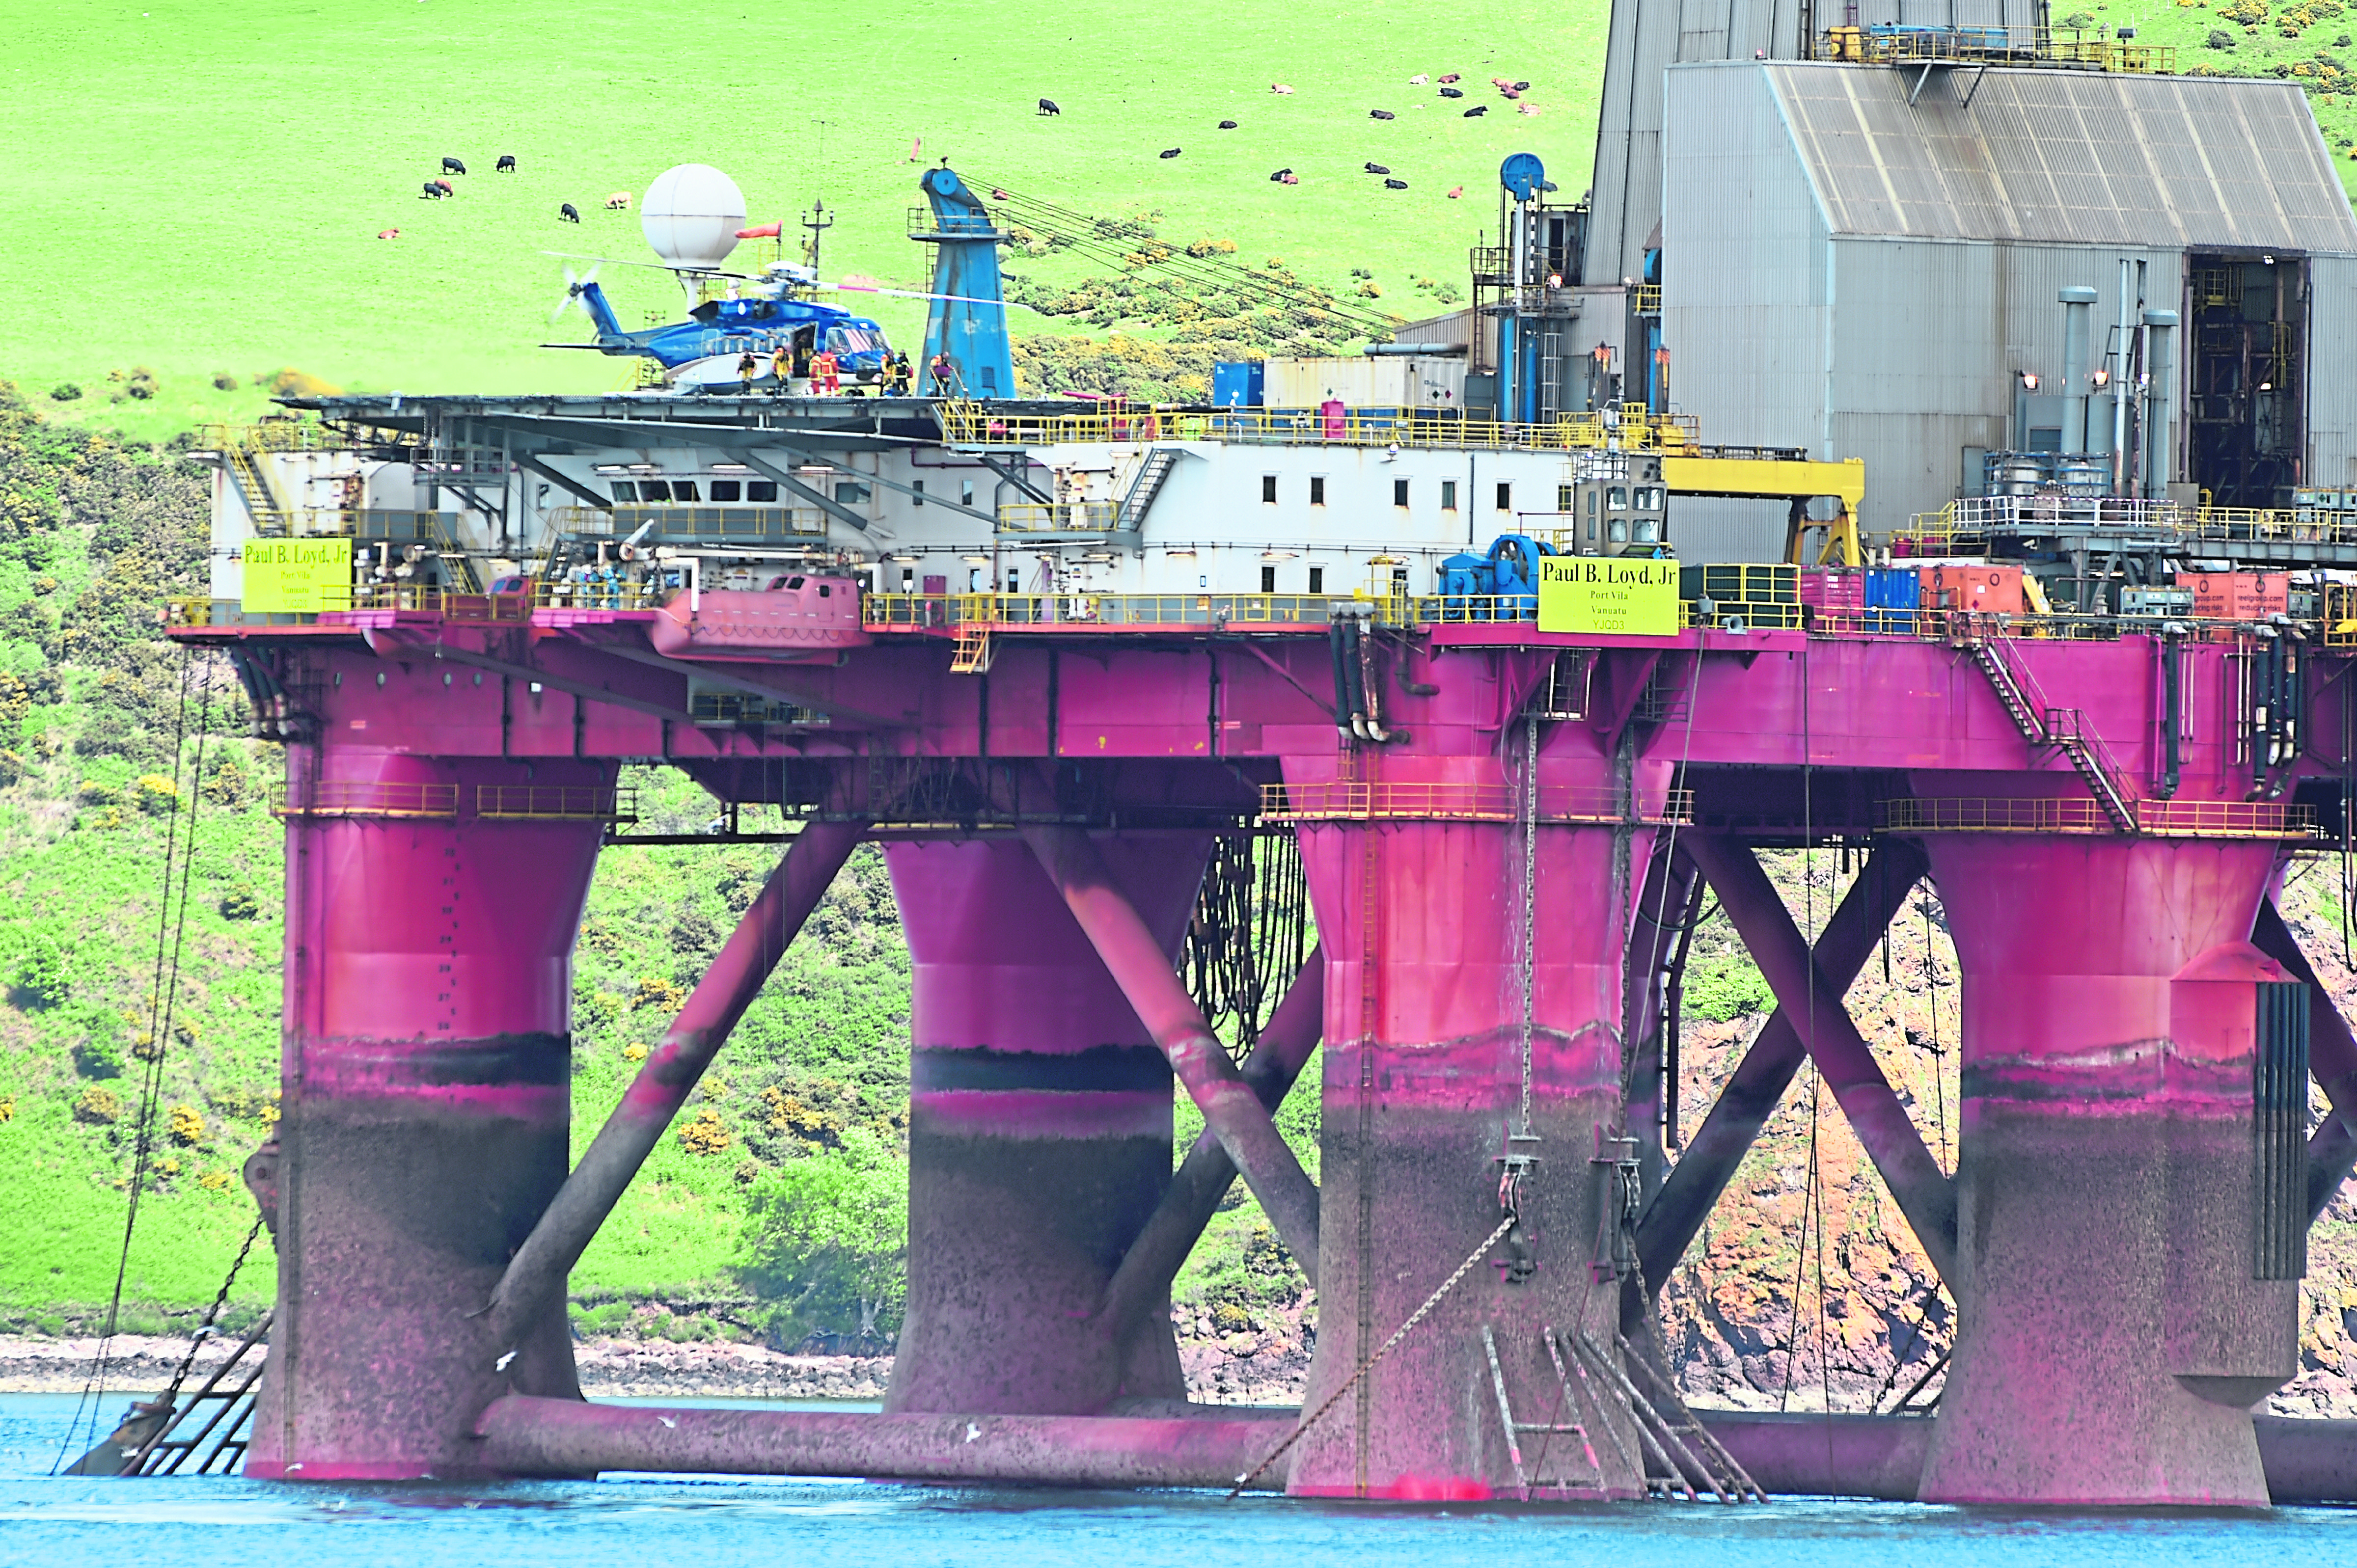 A Helicopter lands on the BP-operated rig, to deal with Greenpeace activists who boarded it.
Picture by Sandy McCook